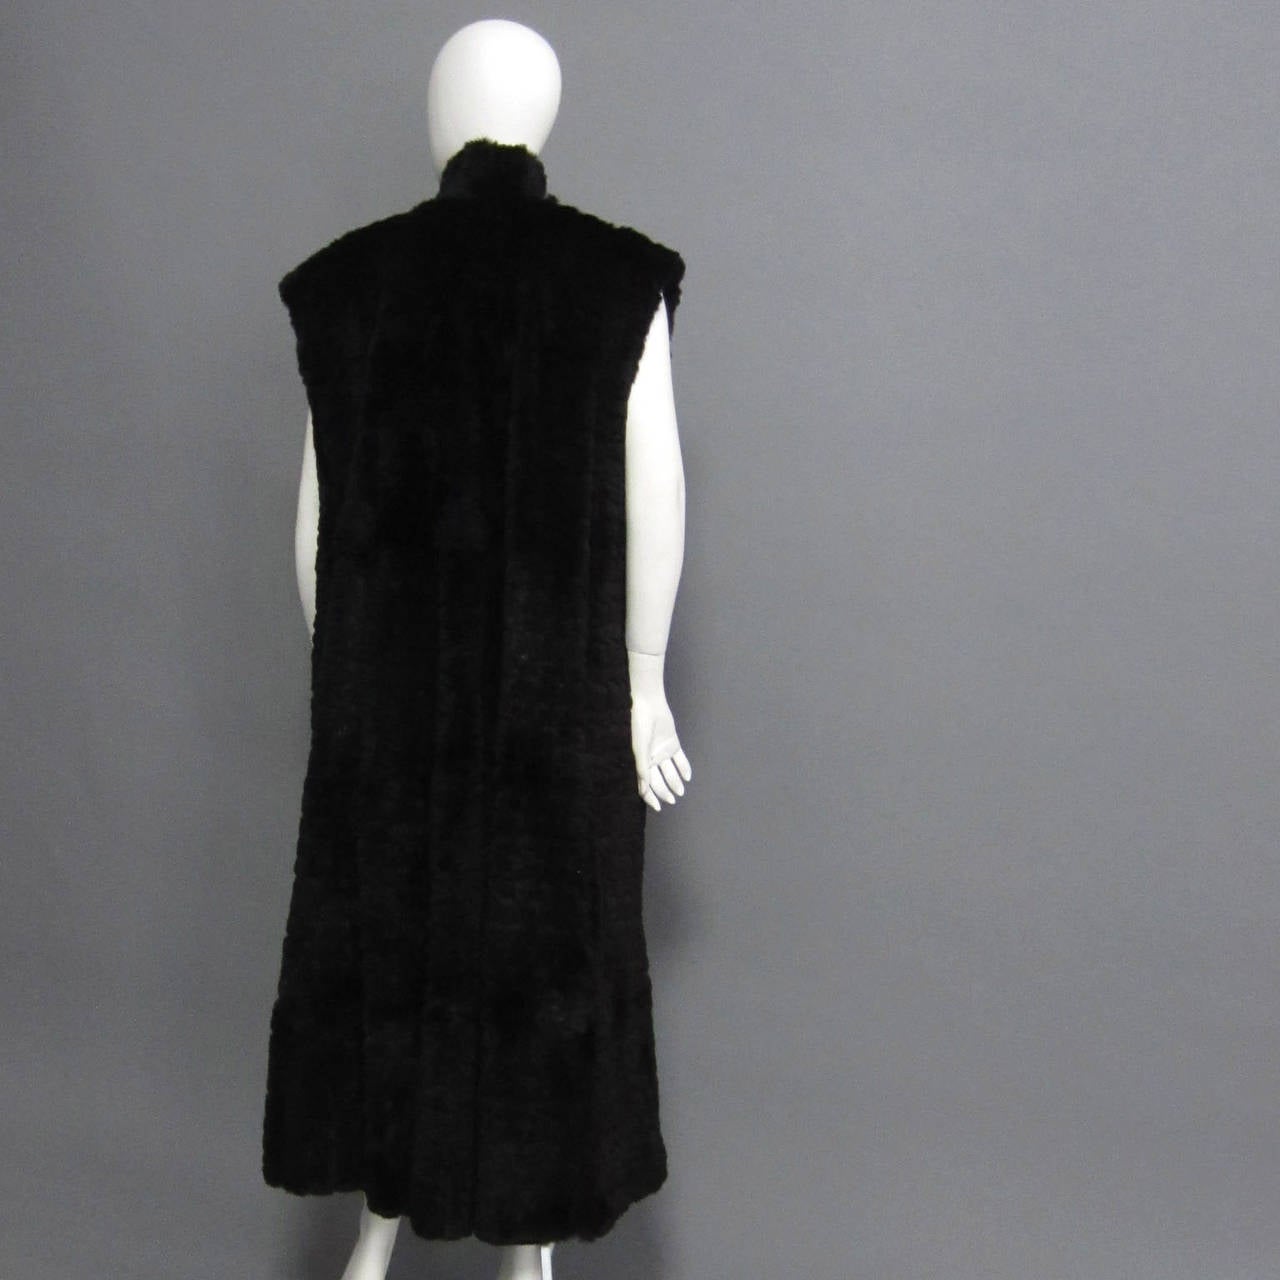 FENDI Detachable Sleeveless Rabbit Fur Vest and Wool Coat In Excellent Condition For Sale In New York, NY